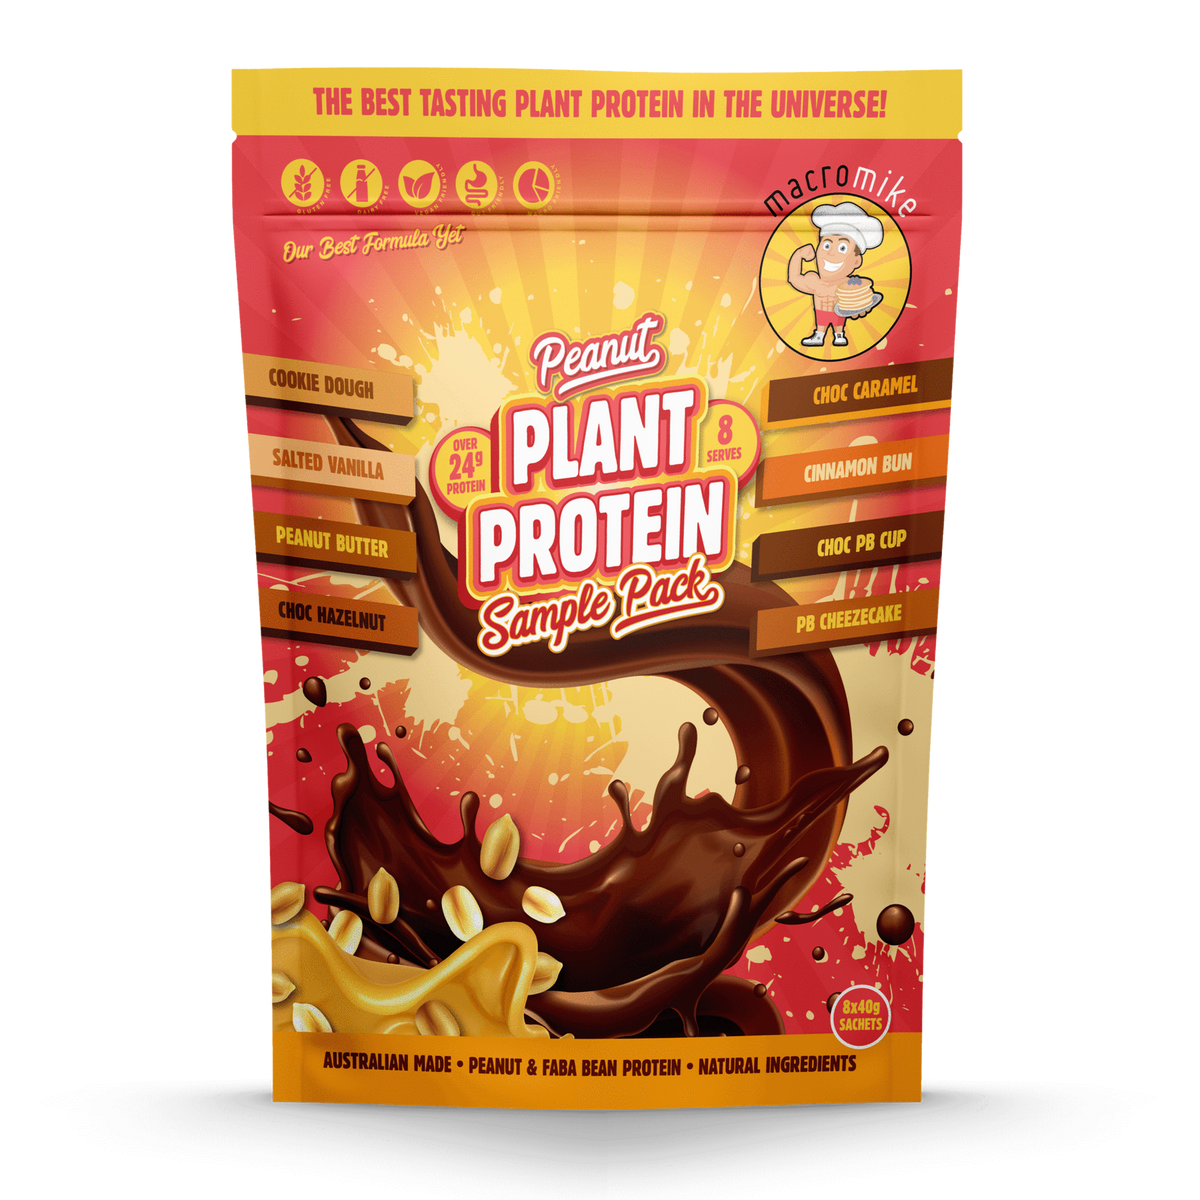 The Plant Protein Sample Pack (Peanut)